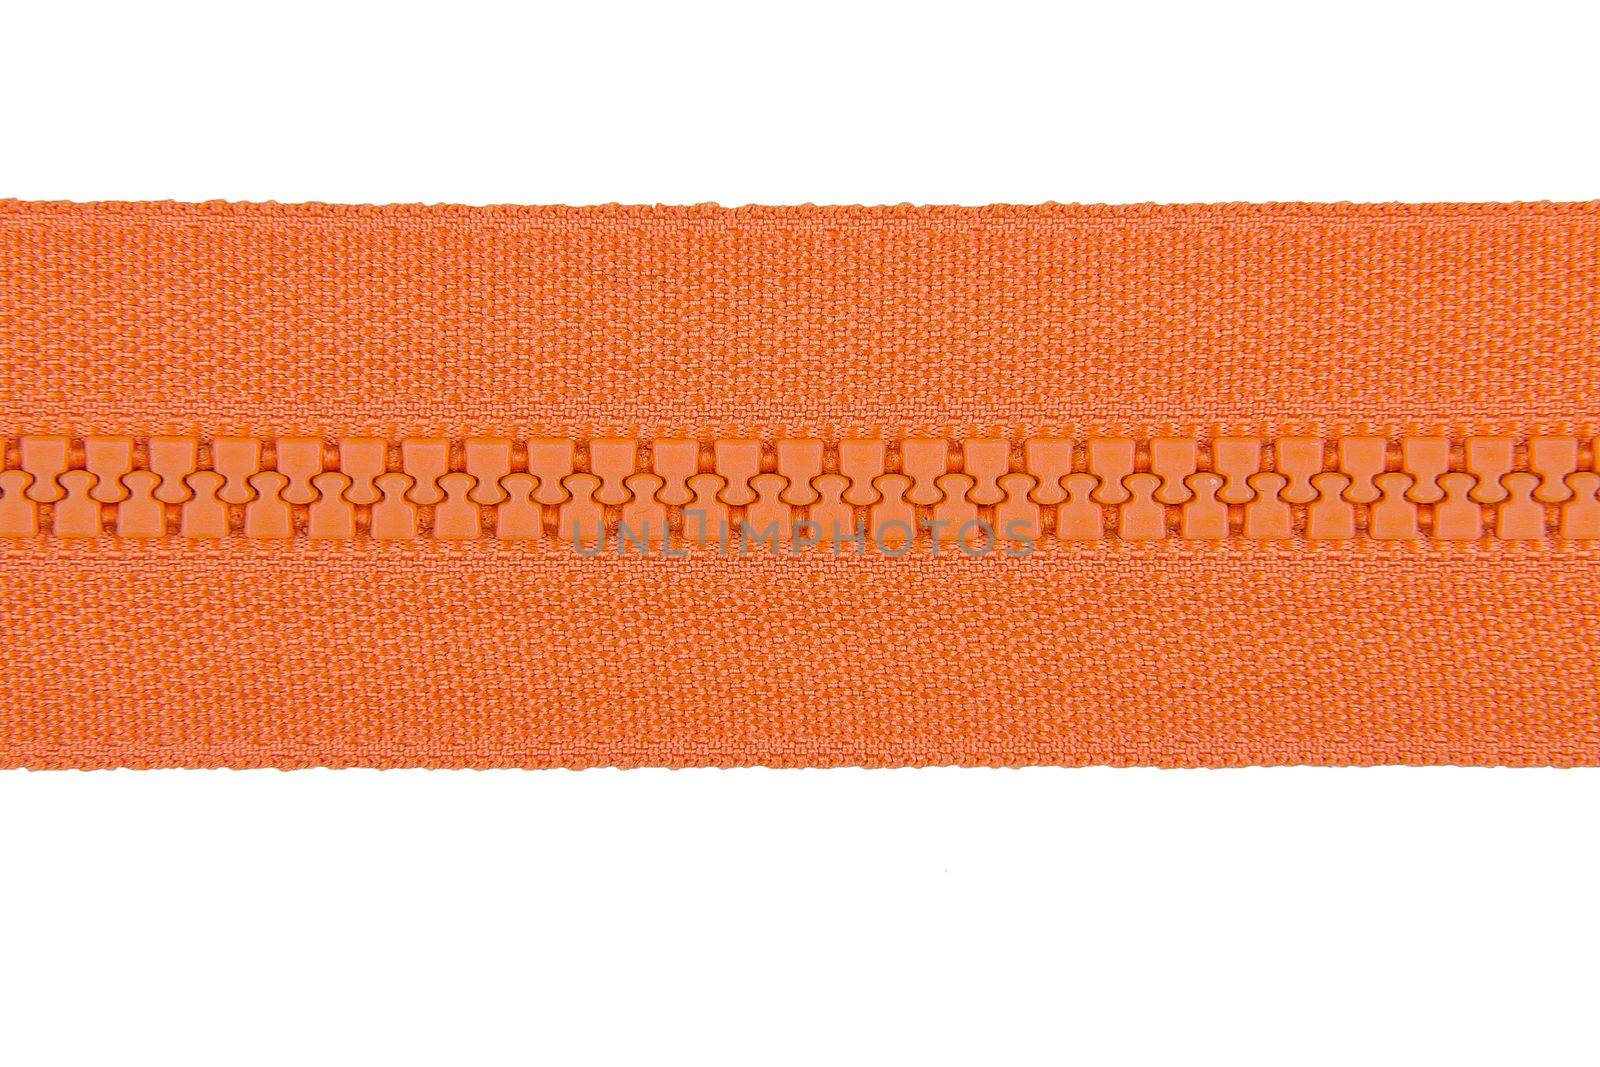 Closed orange zipper isolated on white background. Orange zipper for tailor sewing. by mtx